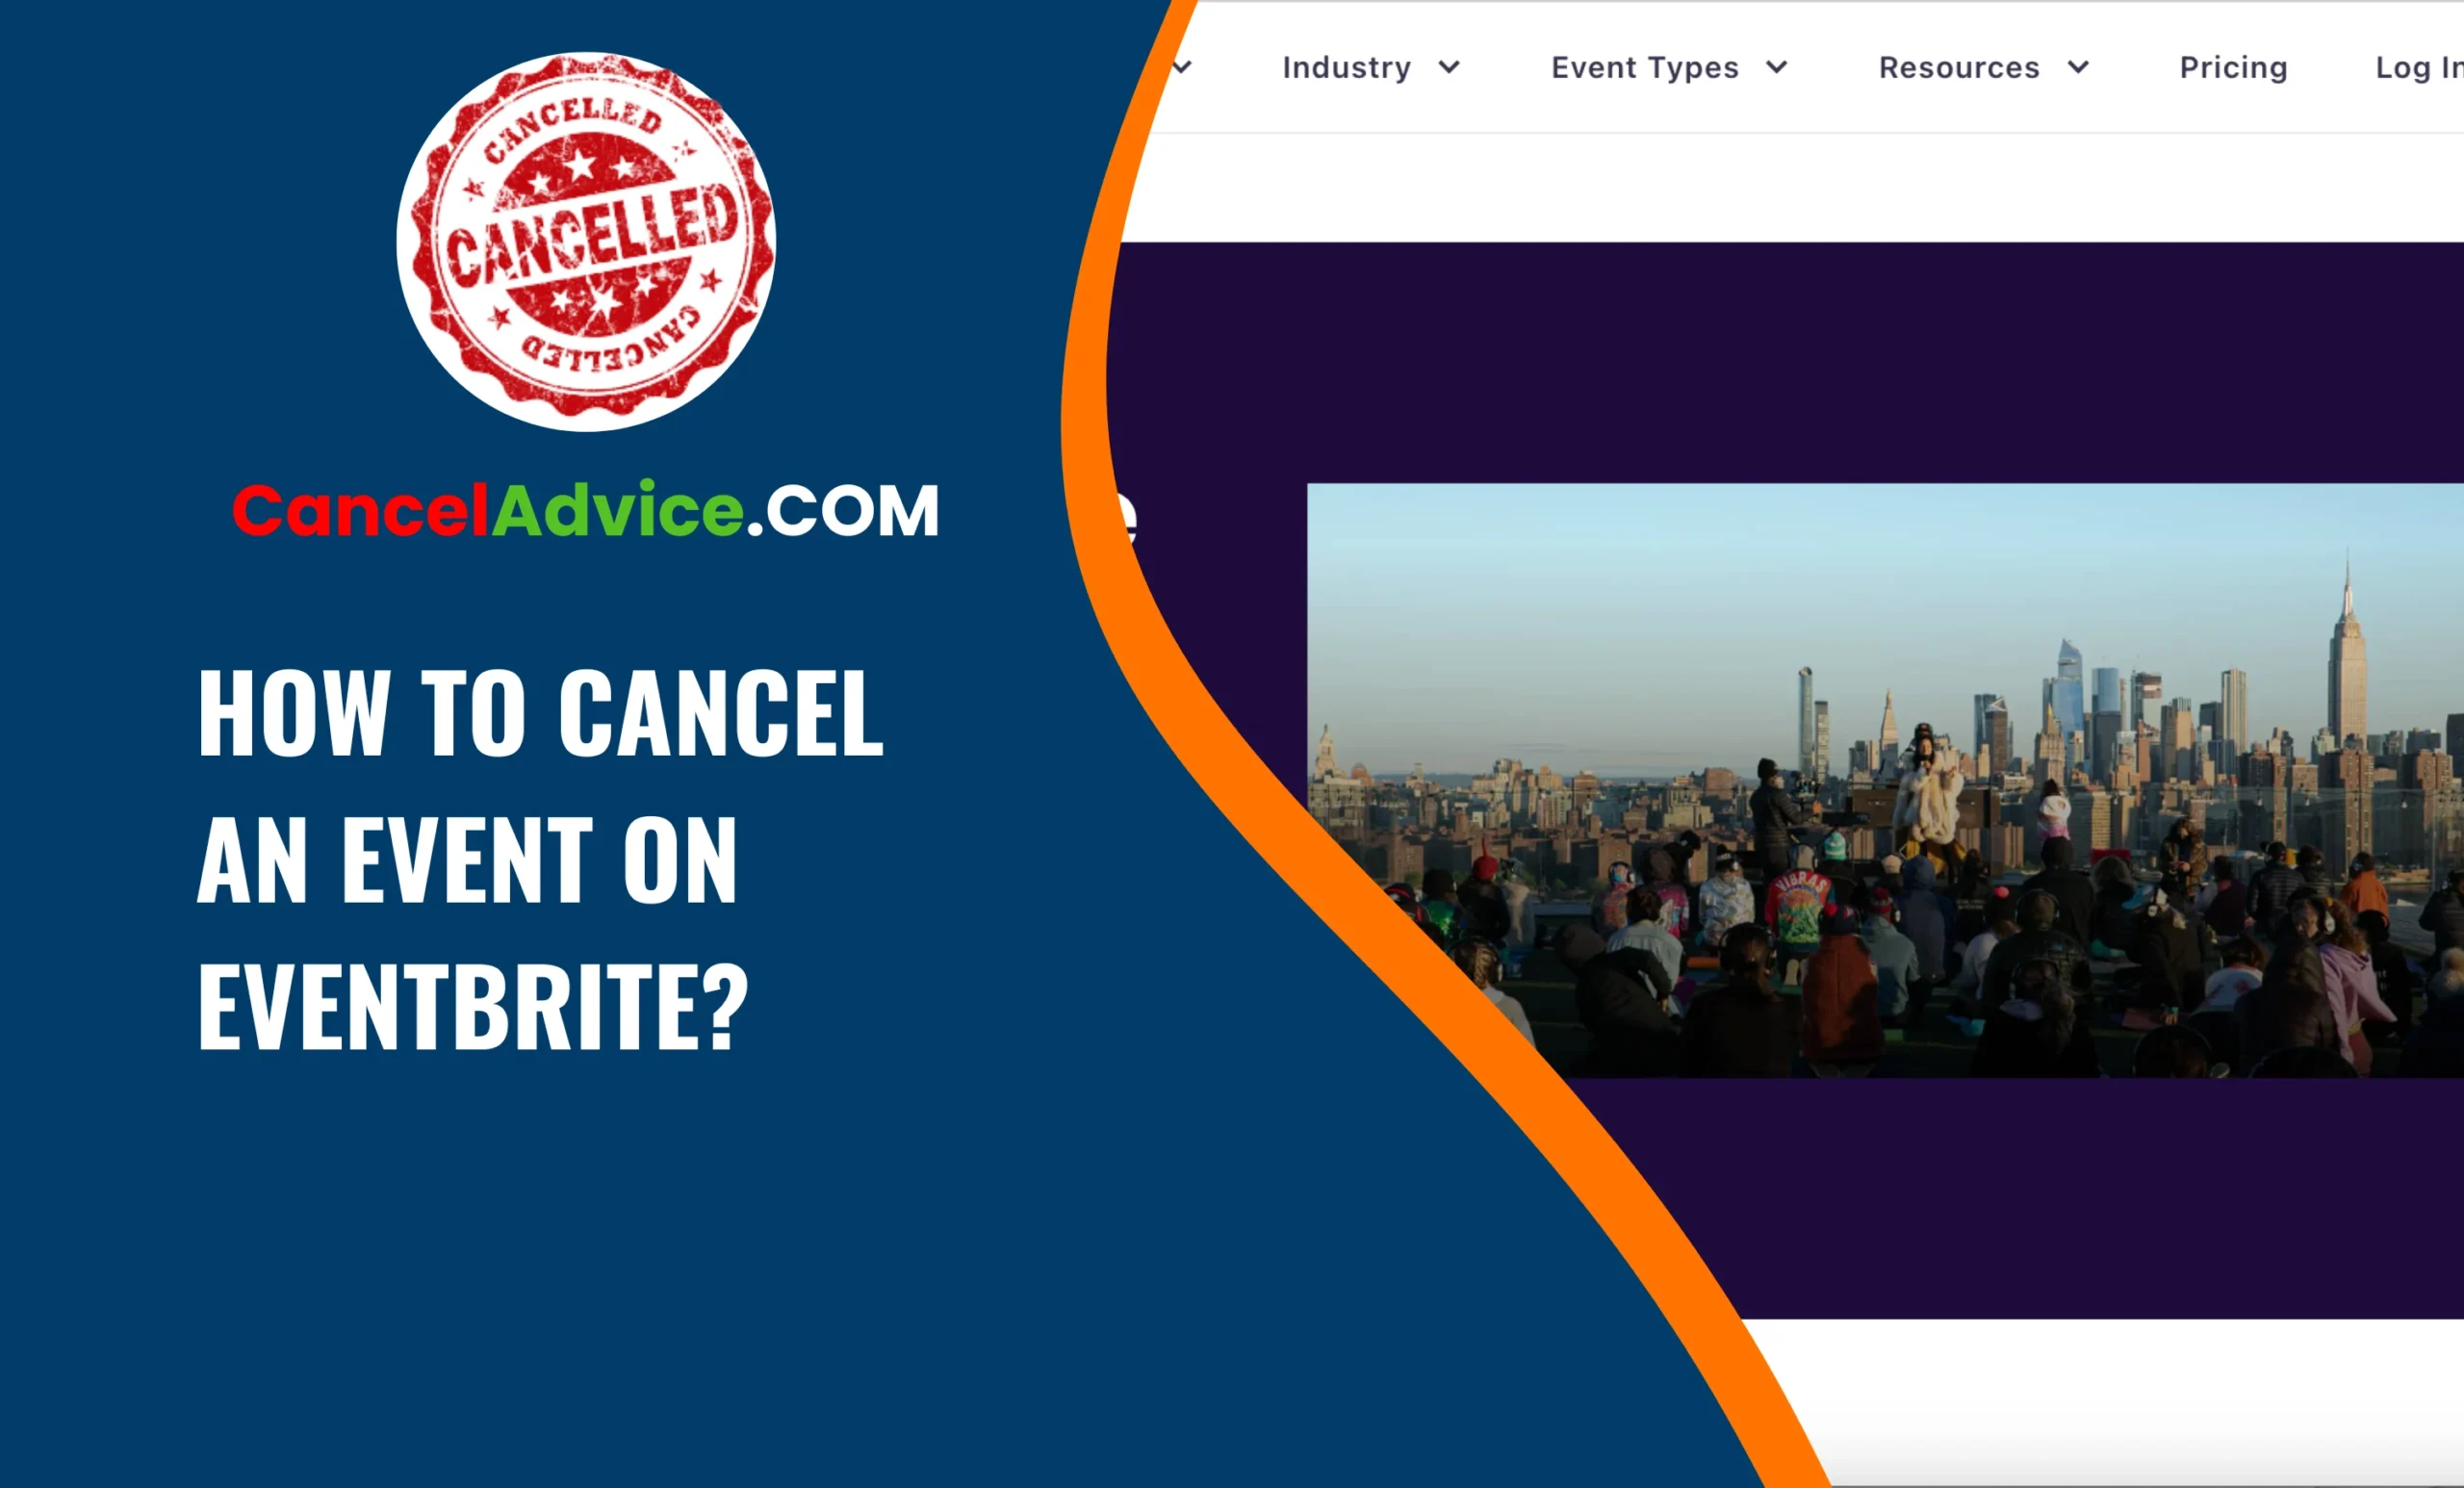 How to Cancel an Event on Eventbrite